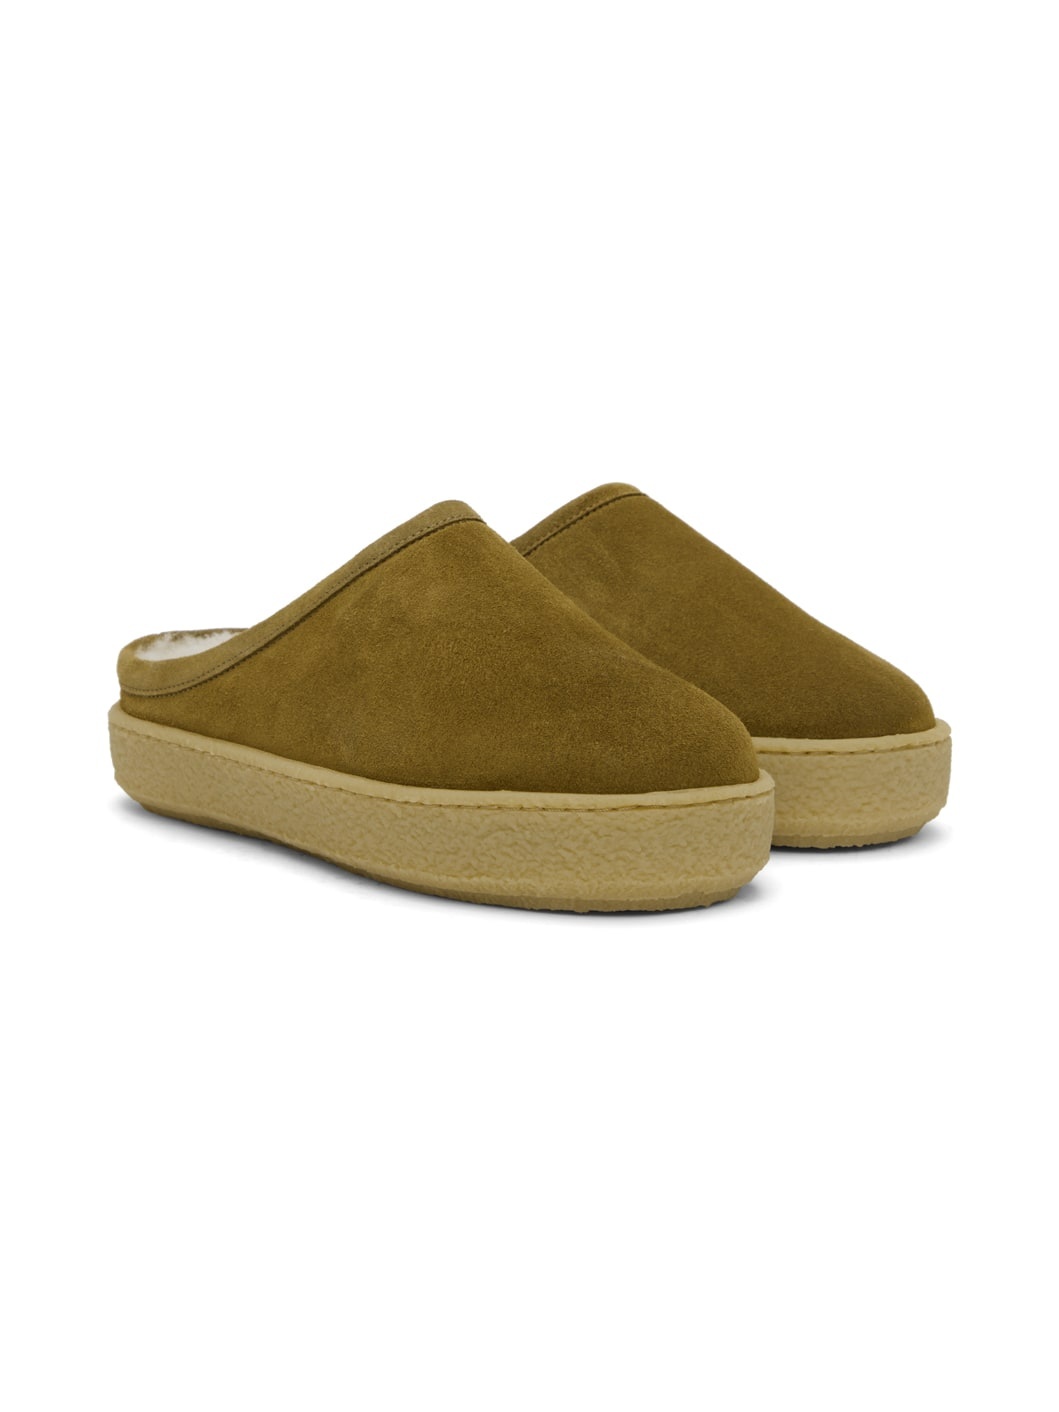 Taupe Fozee Slippers - 4